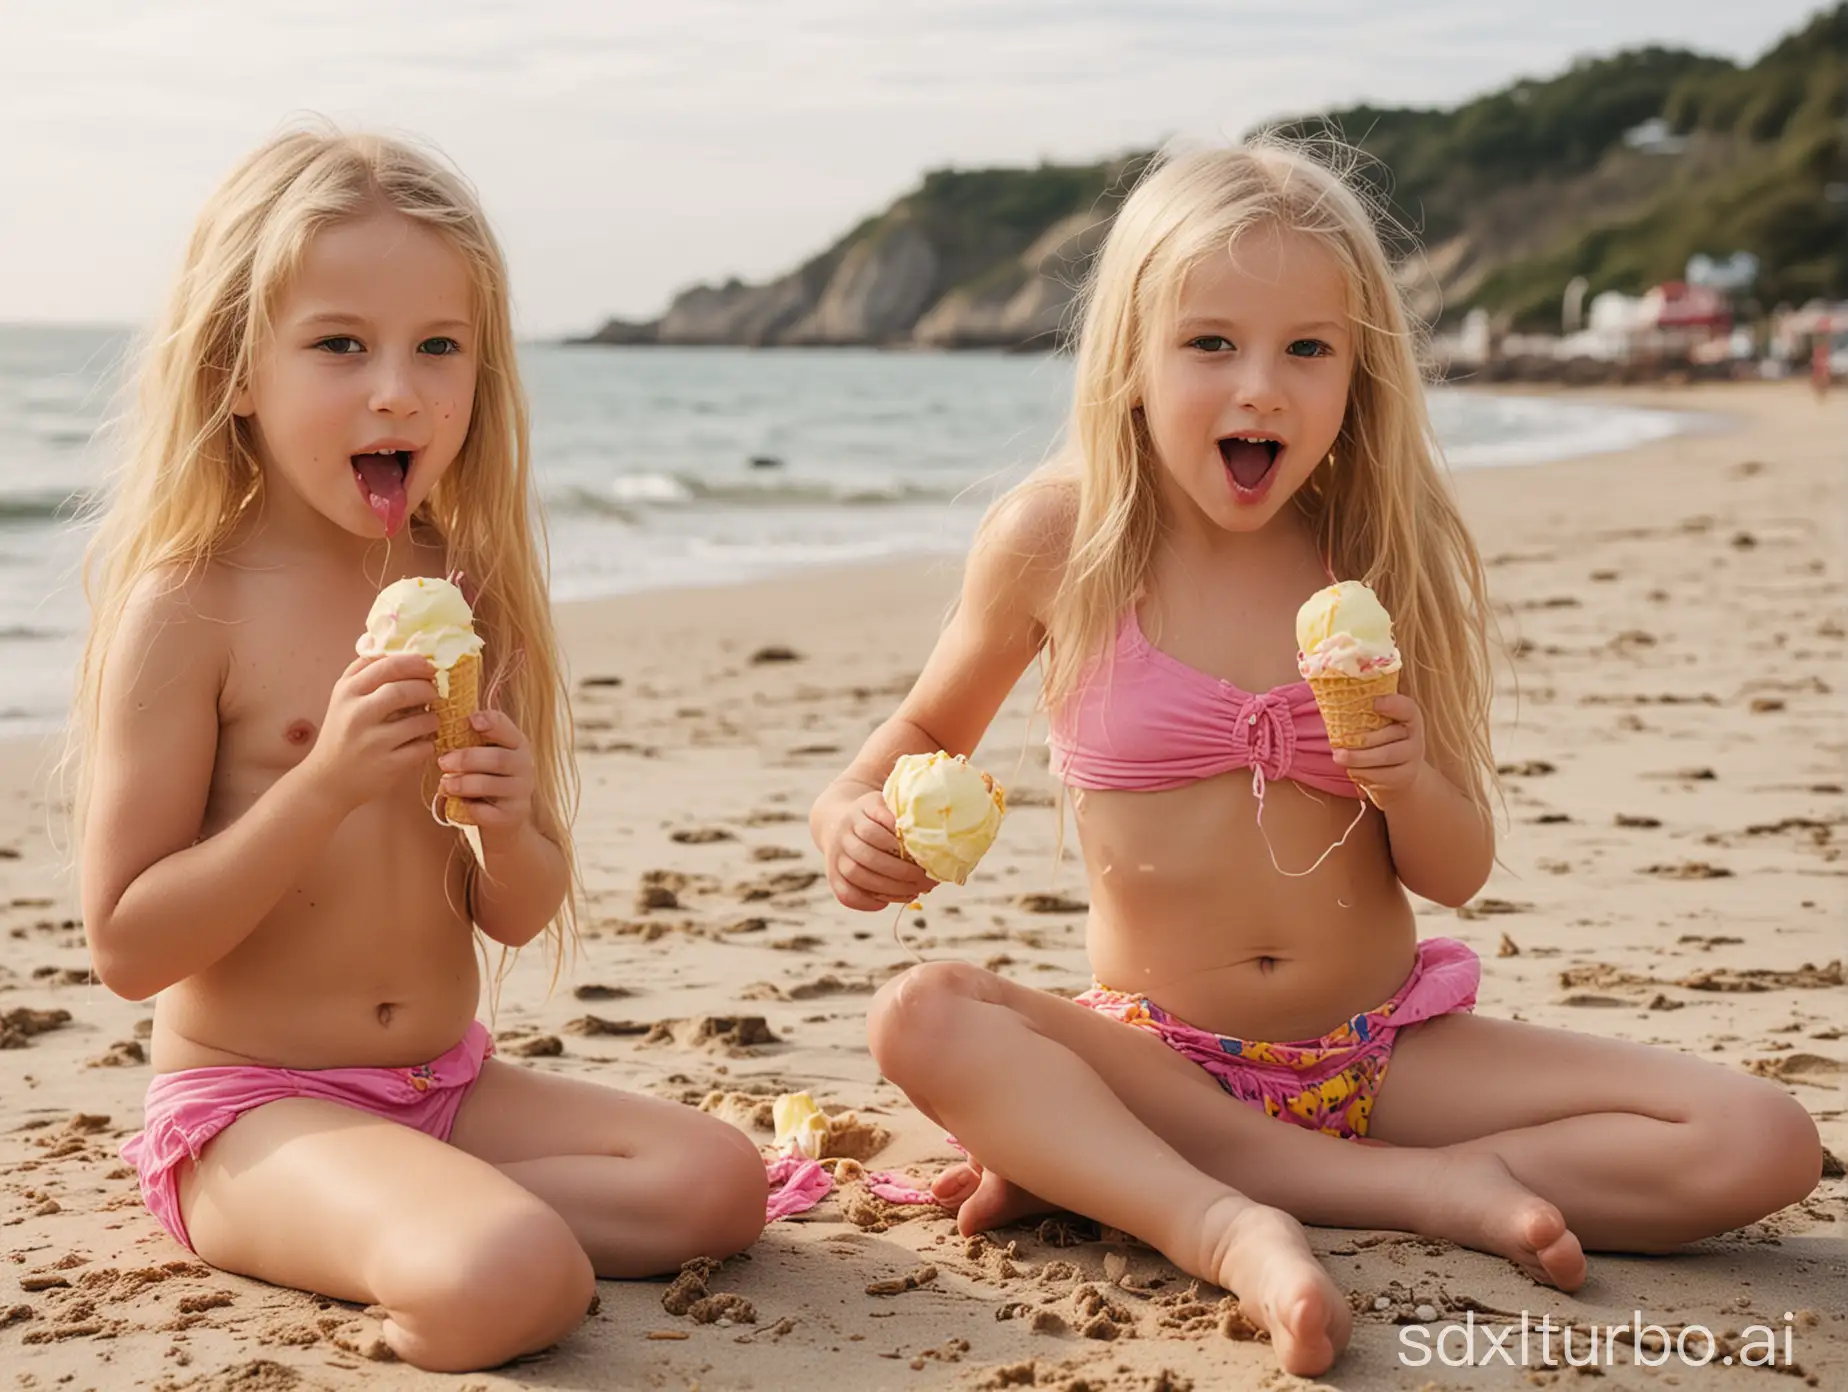 2 seven year old girls in yellow and pink string eating icecream and showing belly, blond long hair, shirtless, on beach